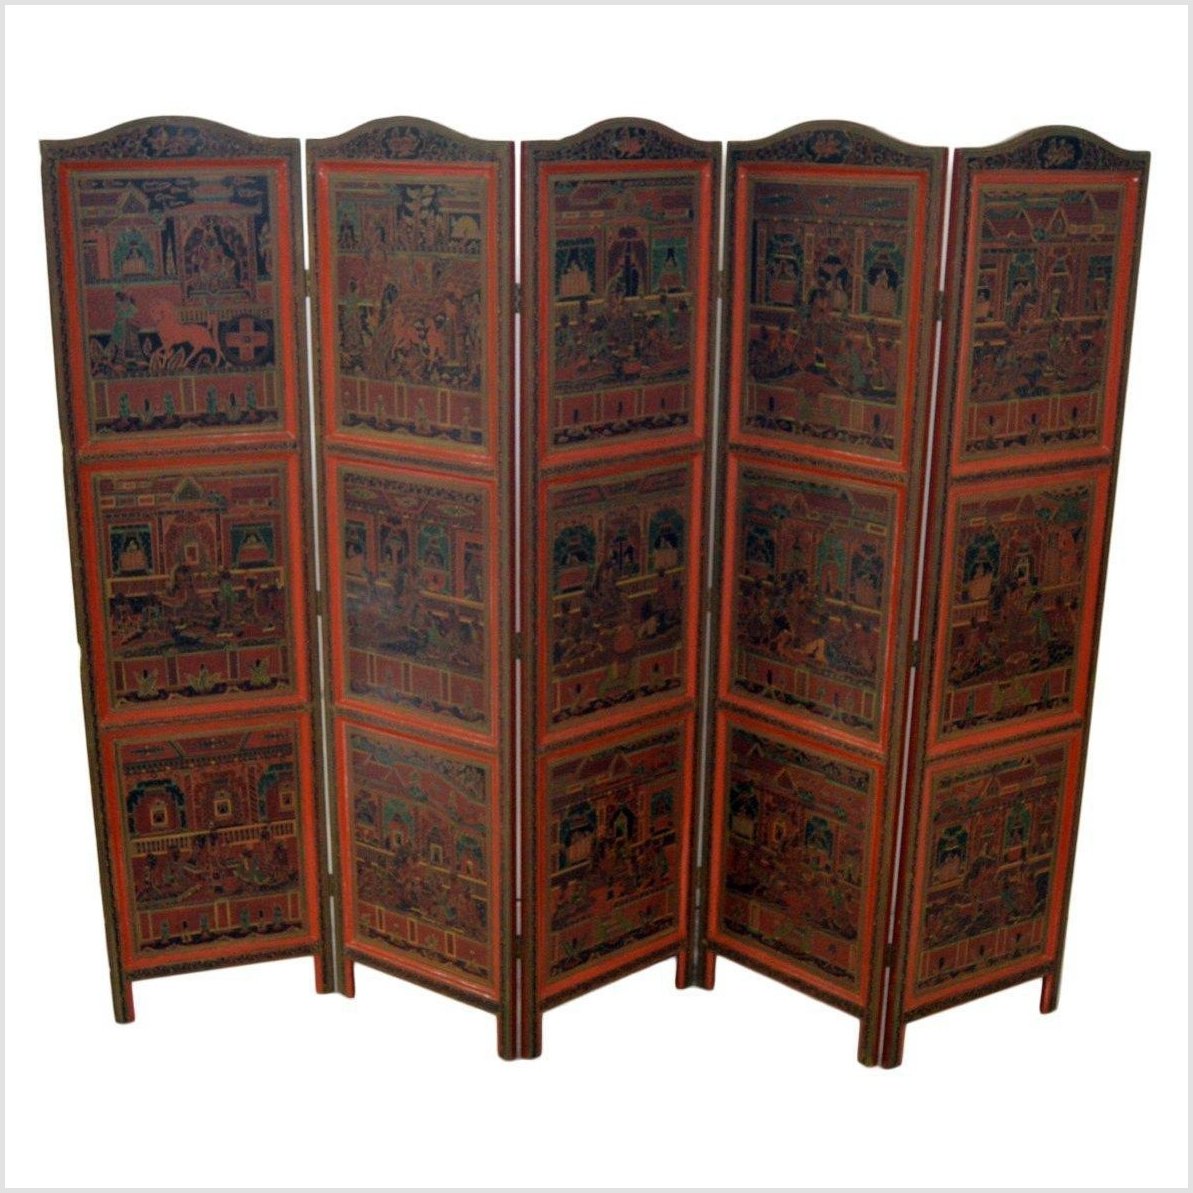 4-Panel Middle Eastern Art Inspired Screen-YN2844-1. Asian & Chinese Furniture, Art, Antiques, Vintage Home Décor for sale at FEA Home